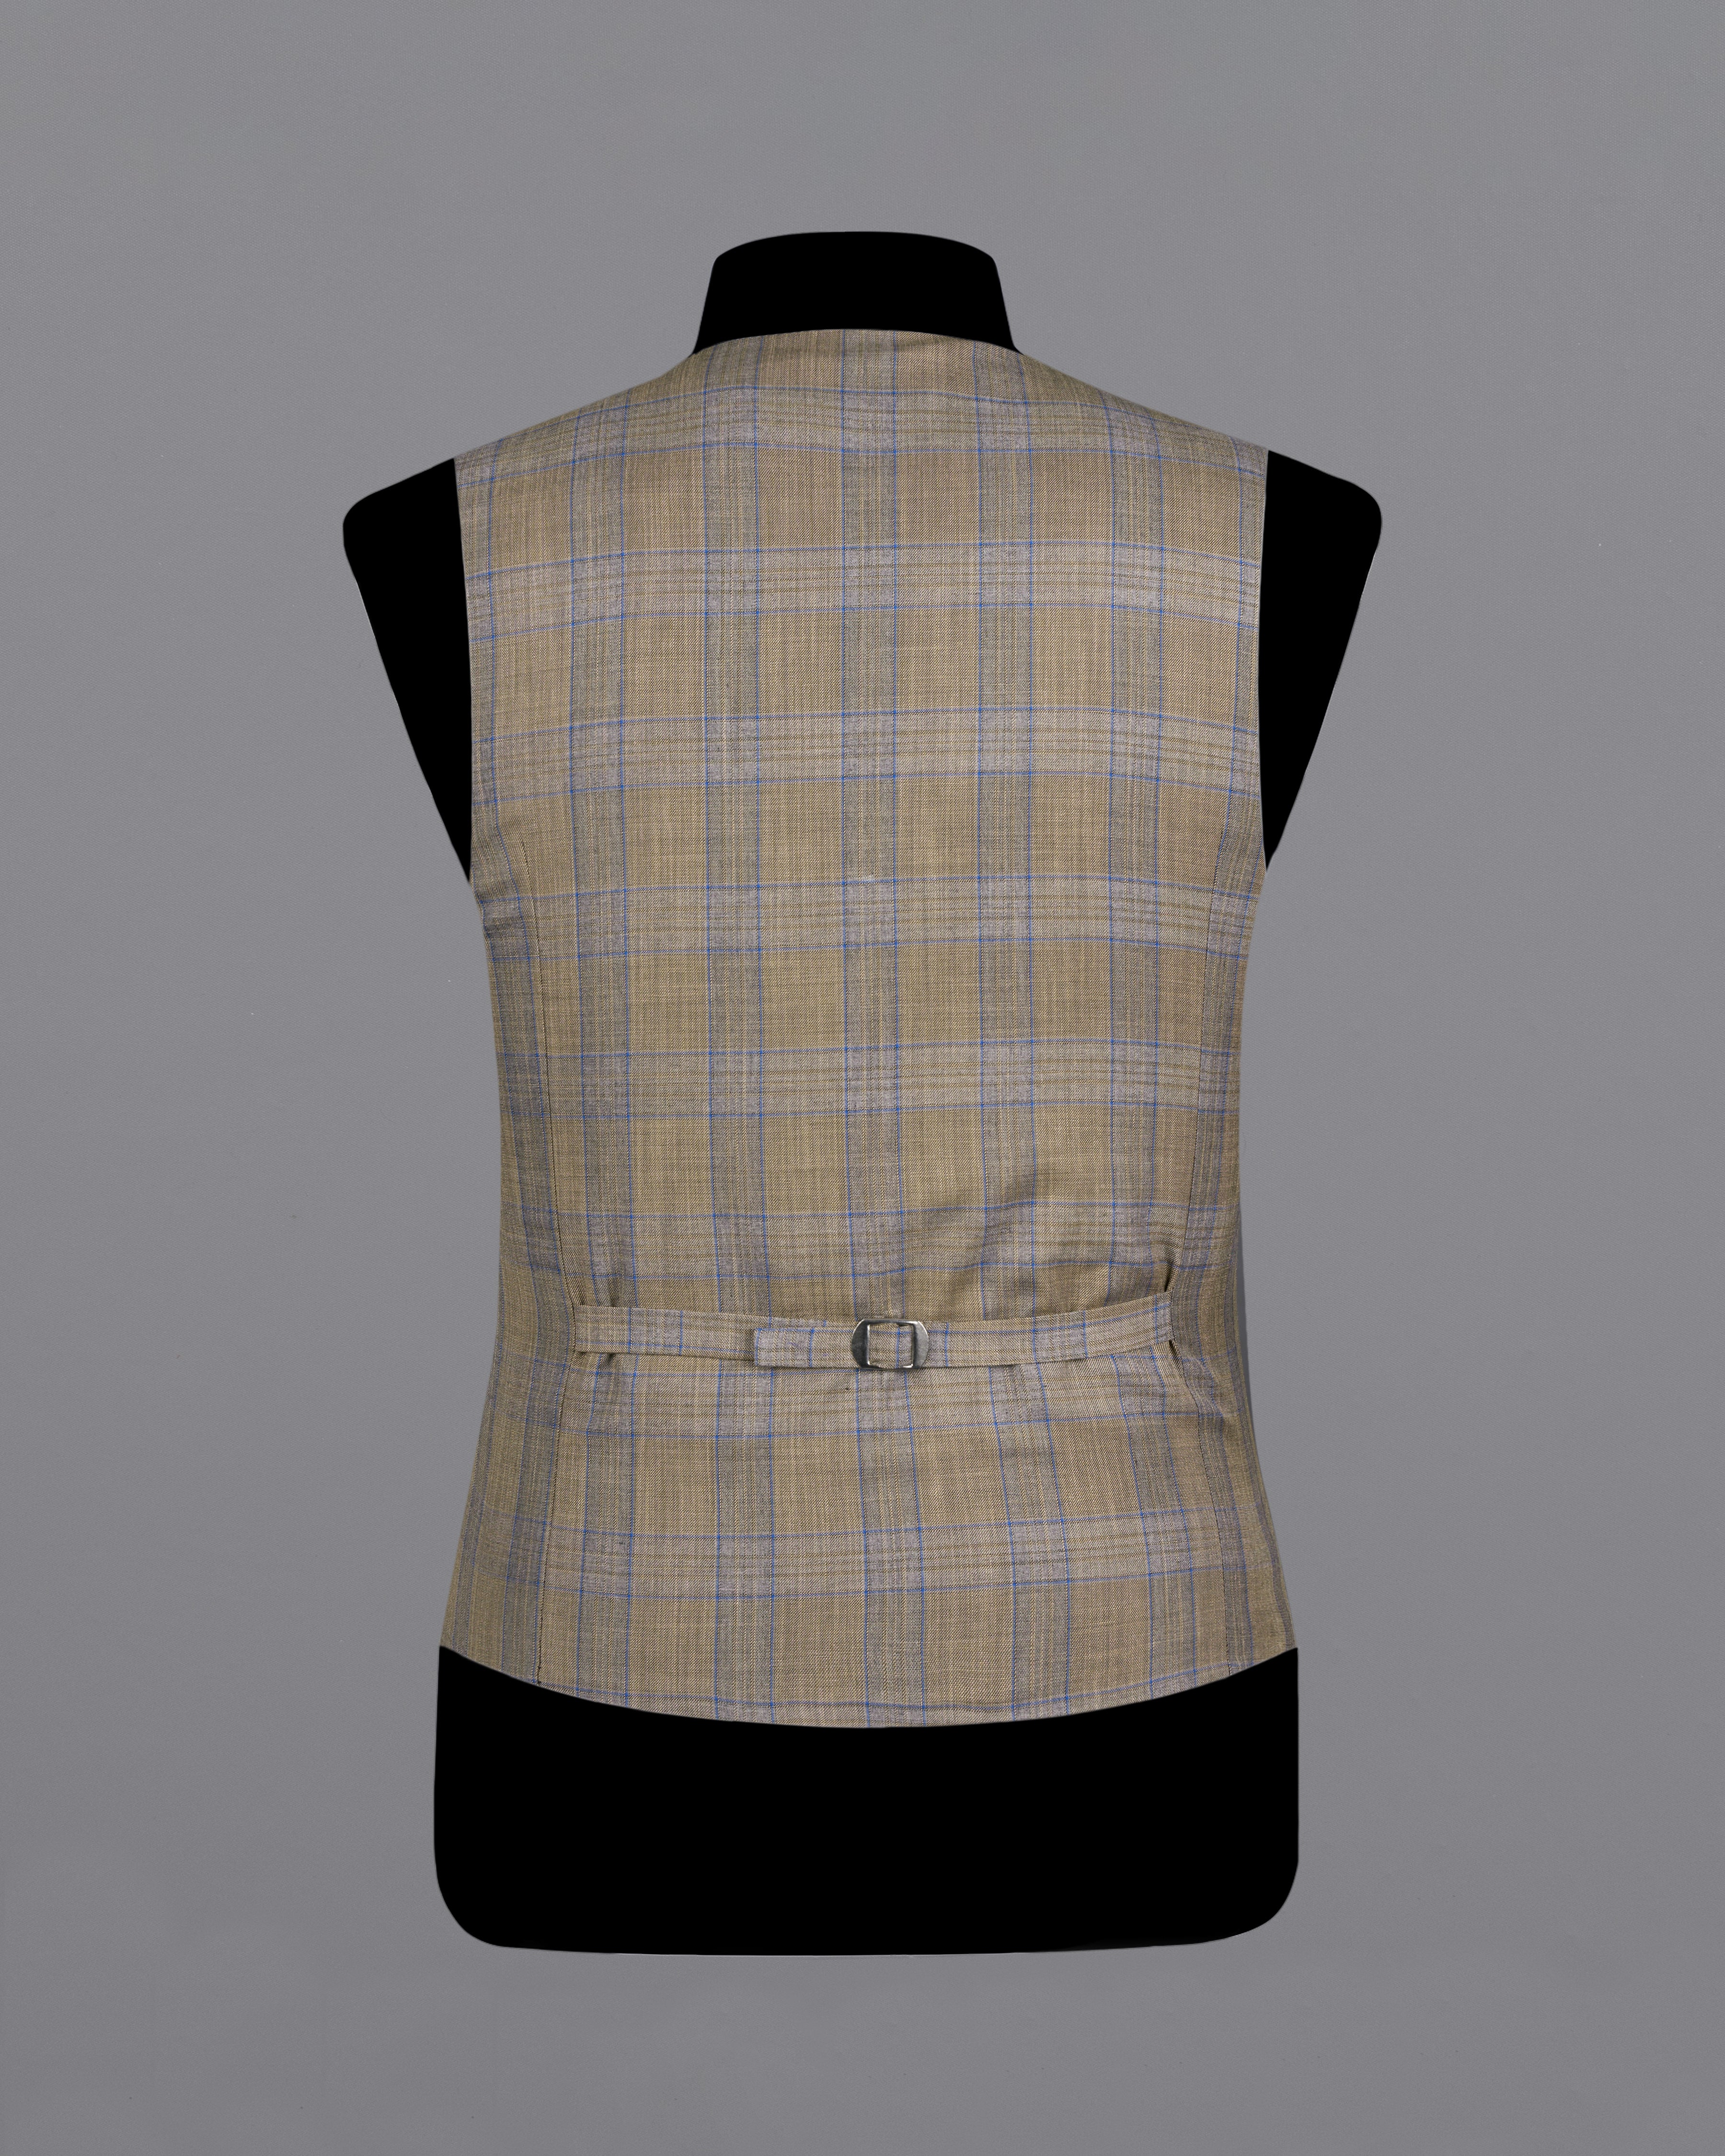 Arrowtown Brown with Azure Blue Plaid Waistcoat V2611-36, V2611-38, V2611-40, V2611-42, V2611-44, V2611-46, V2611-48, V2611-50, V2611-52, V2611-54, V2611-56, V2611-58, V2611-60